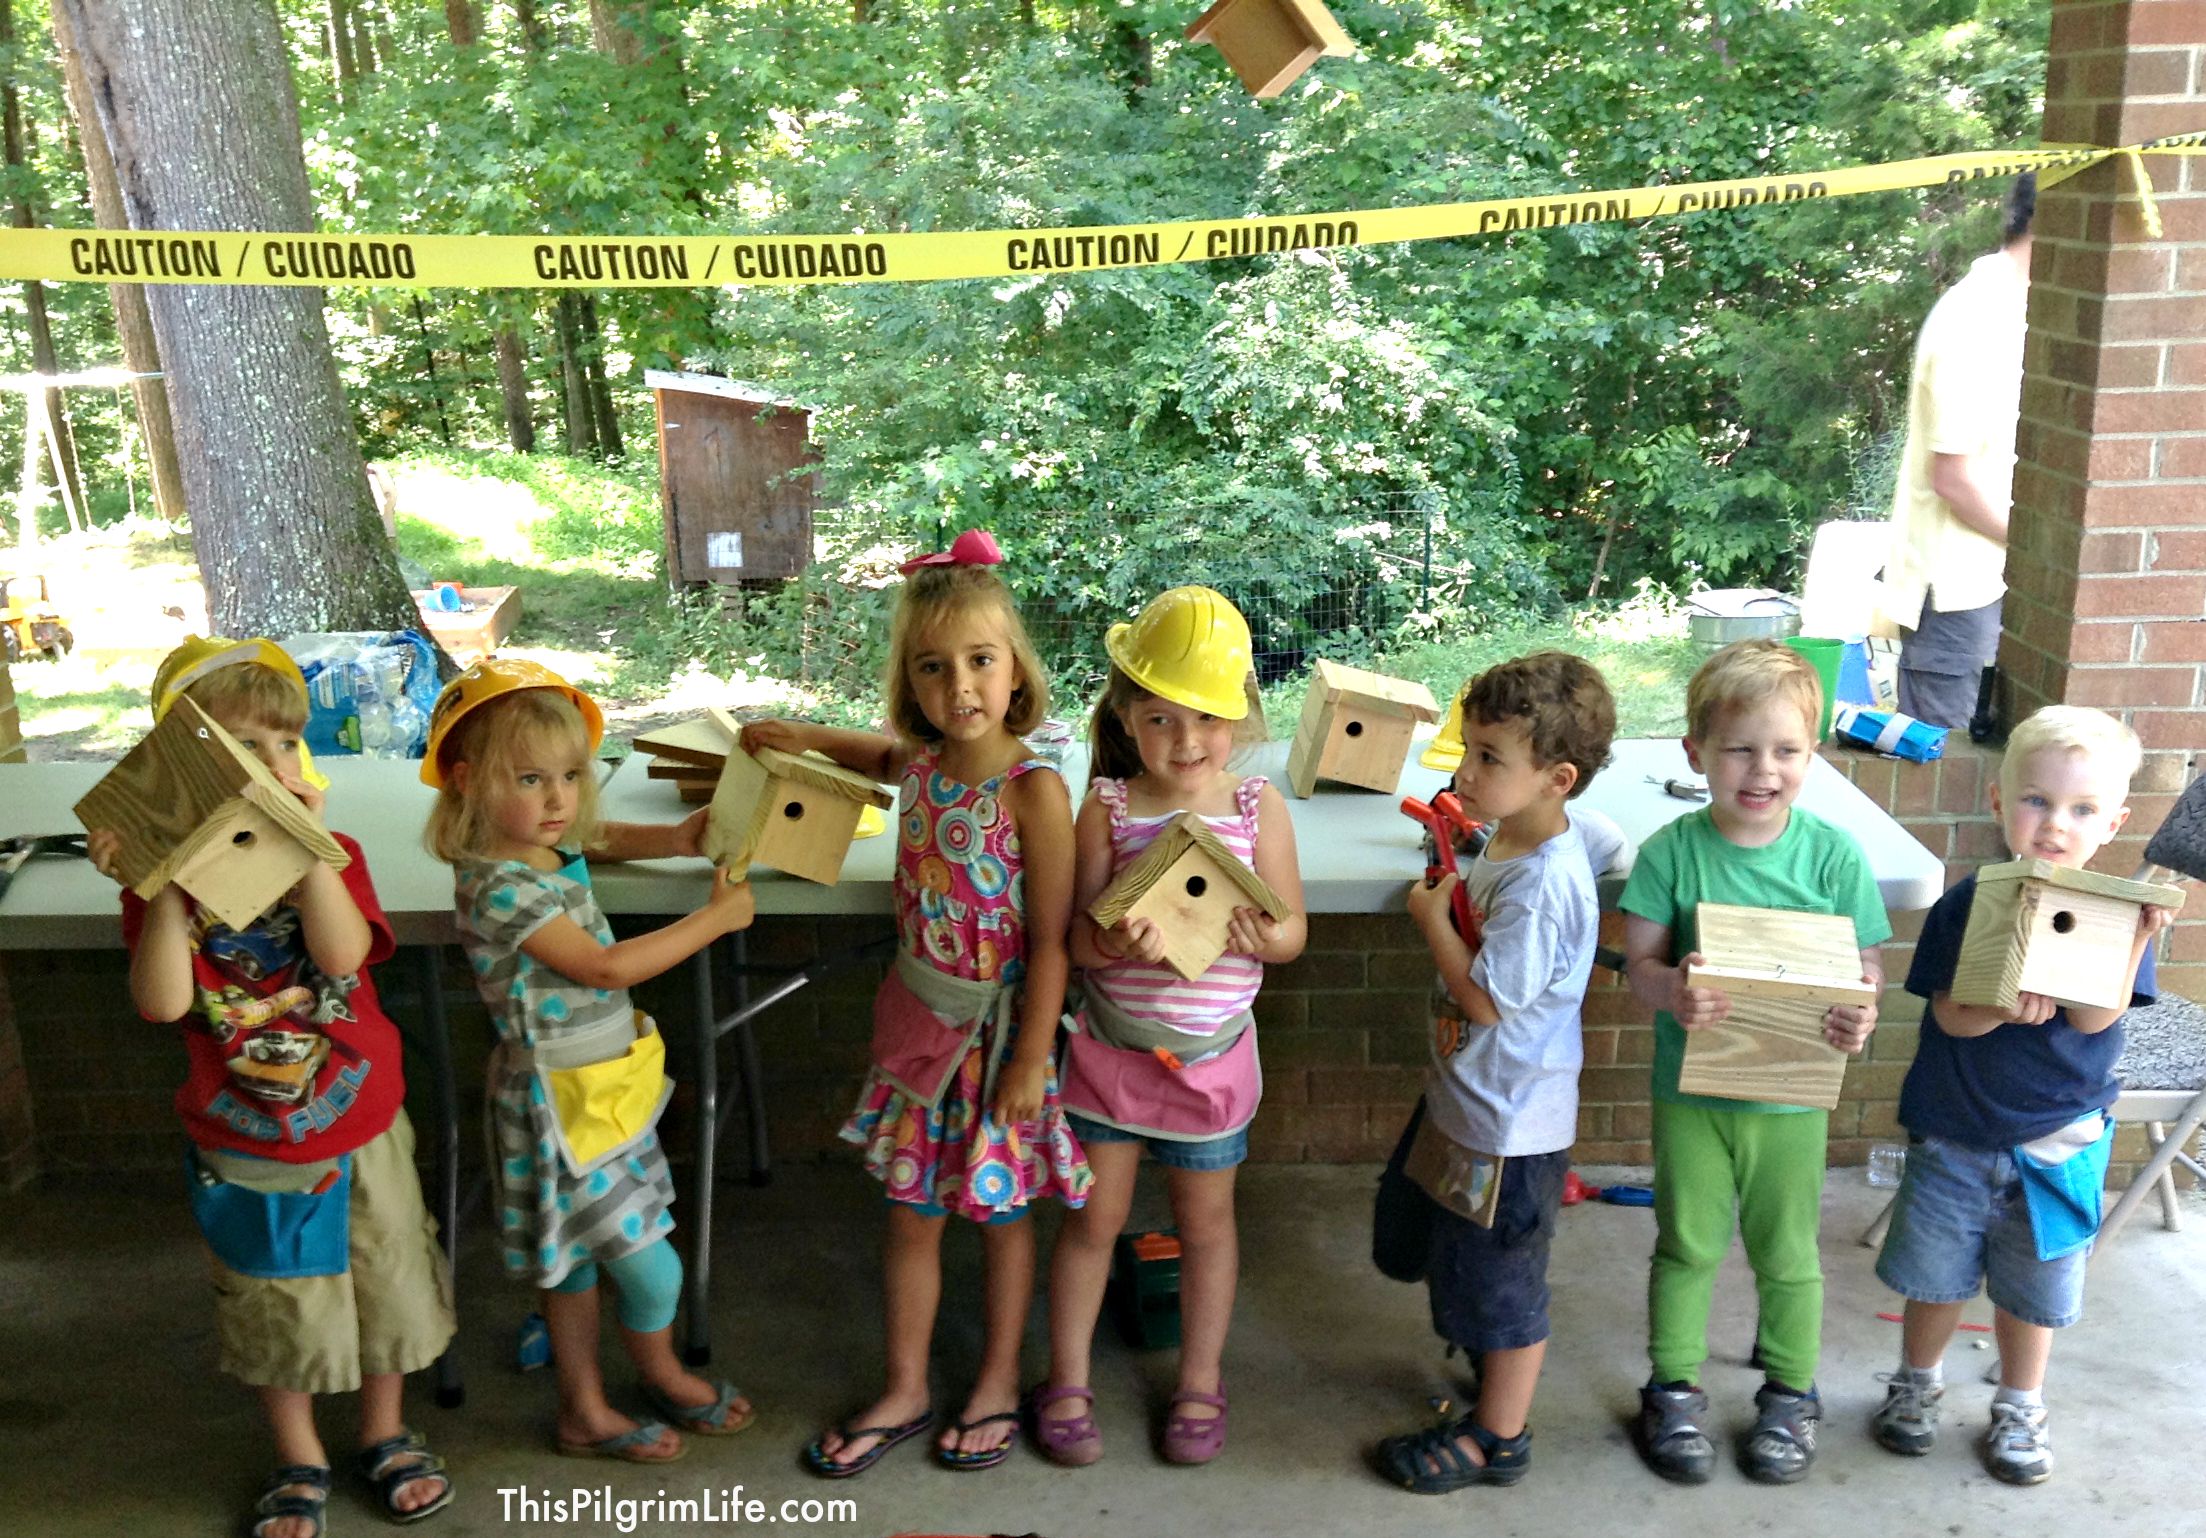 Such a fun party for any kid who loves tools and building! Hard hats, tool belts, and lots of fun activities! 